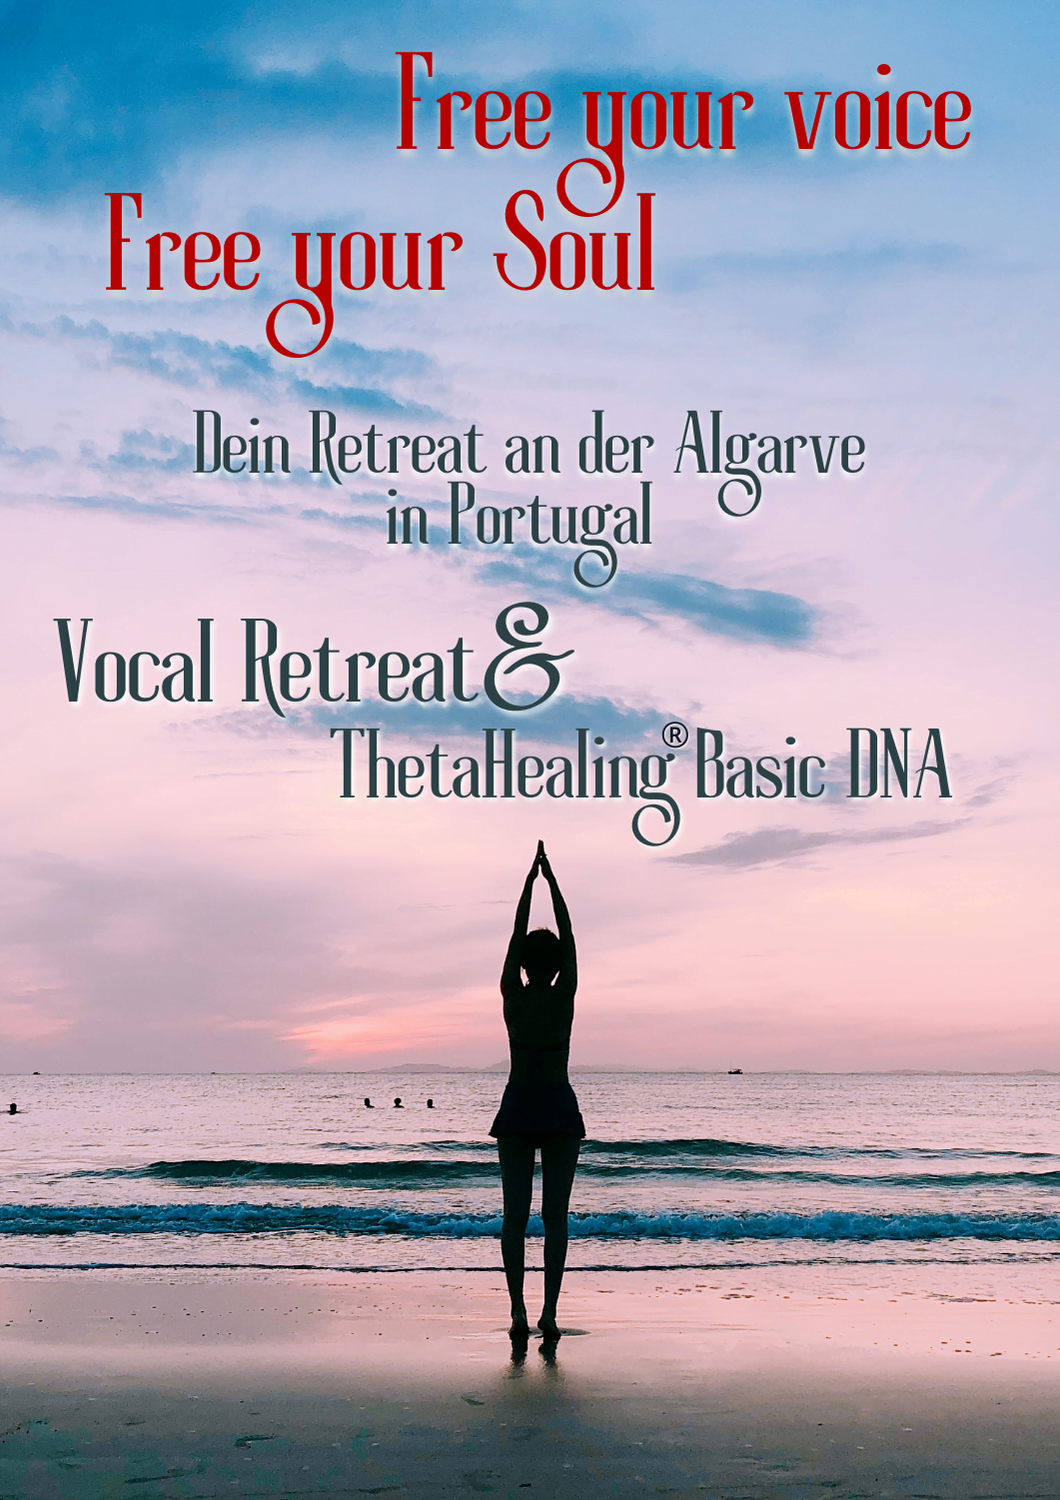 Free your Voice - Free your Soul